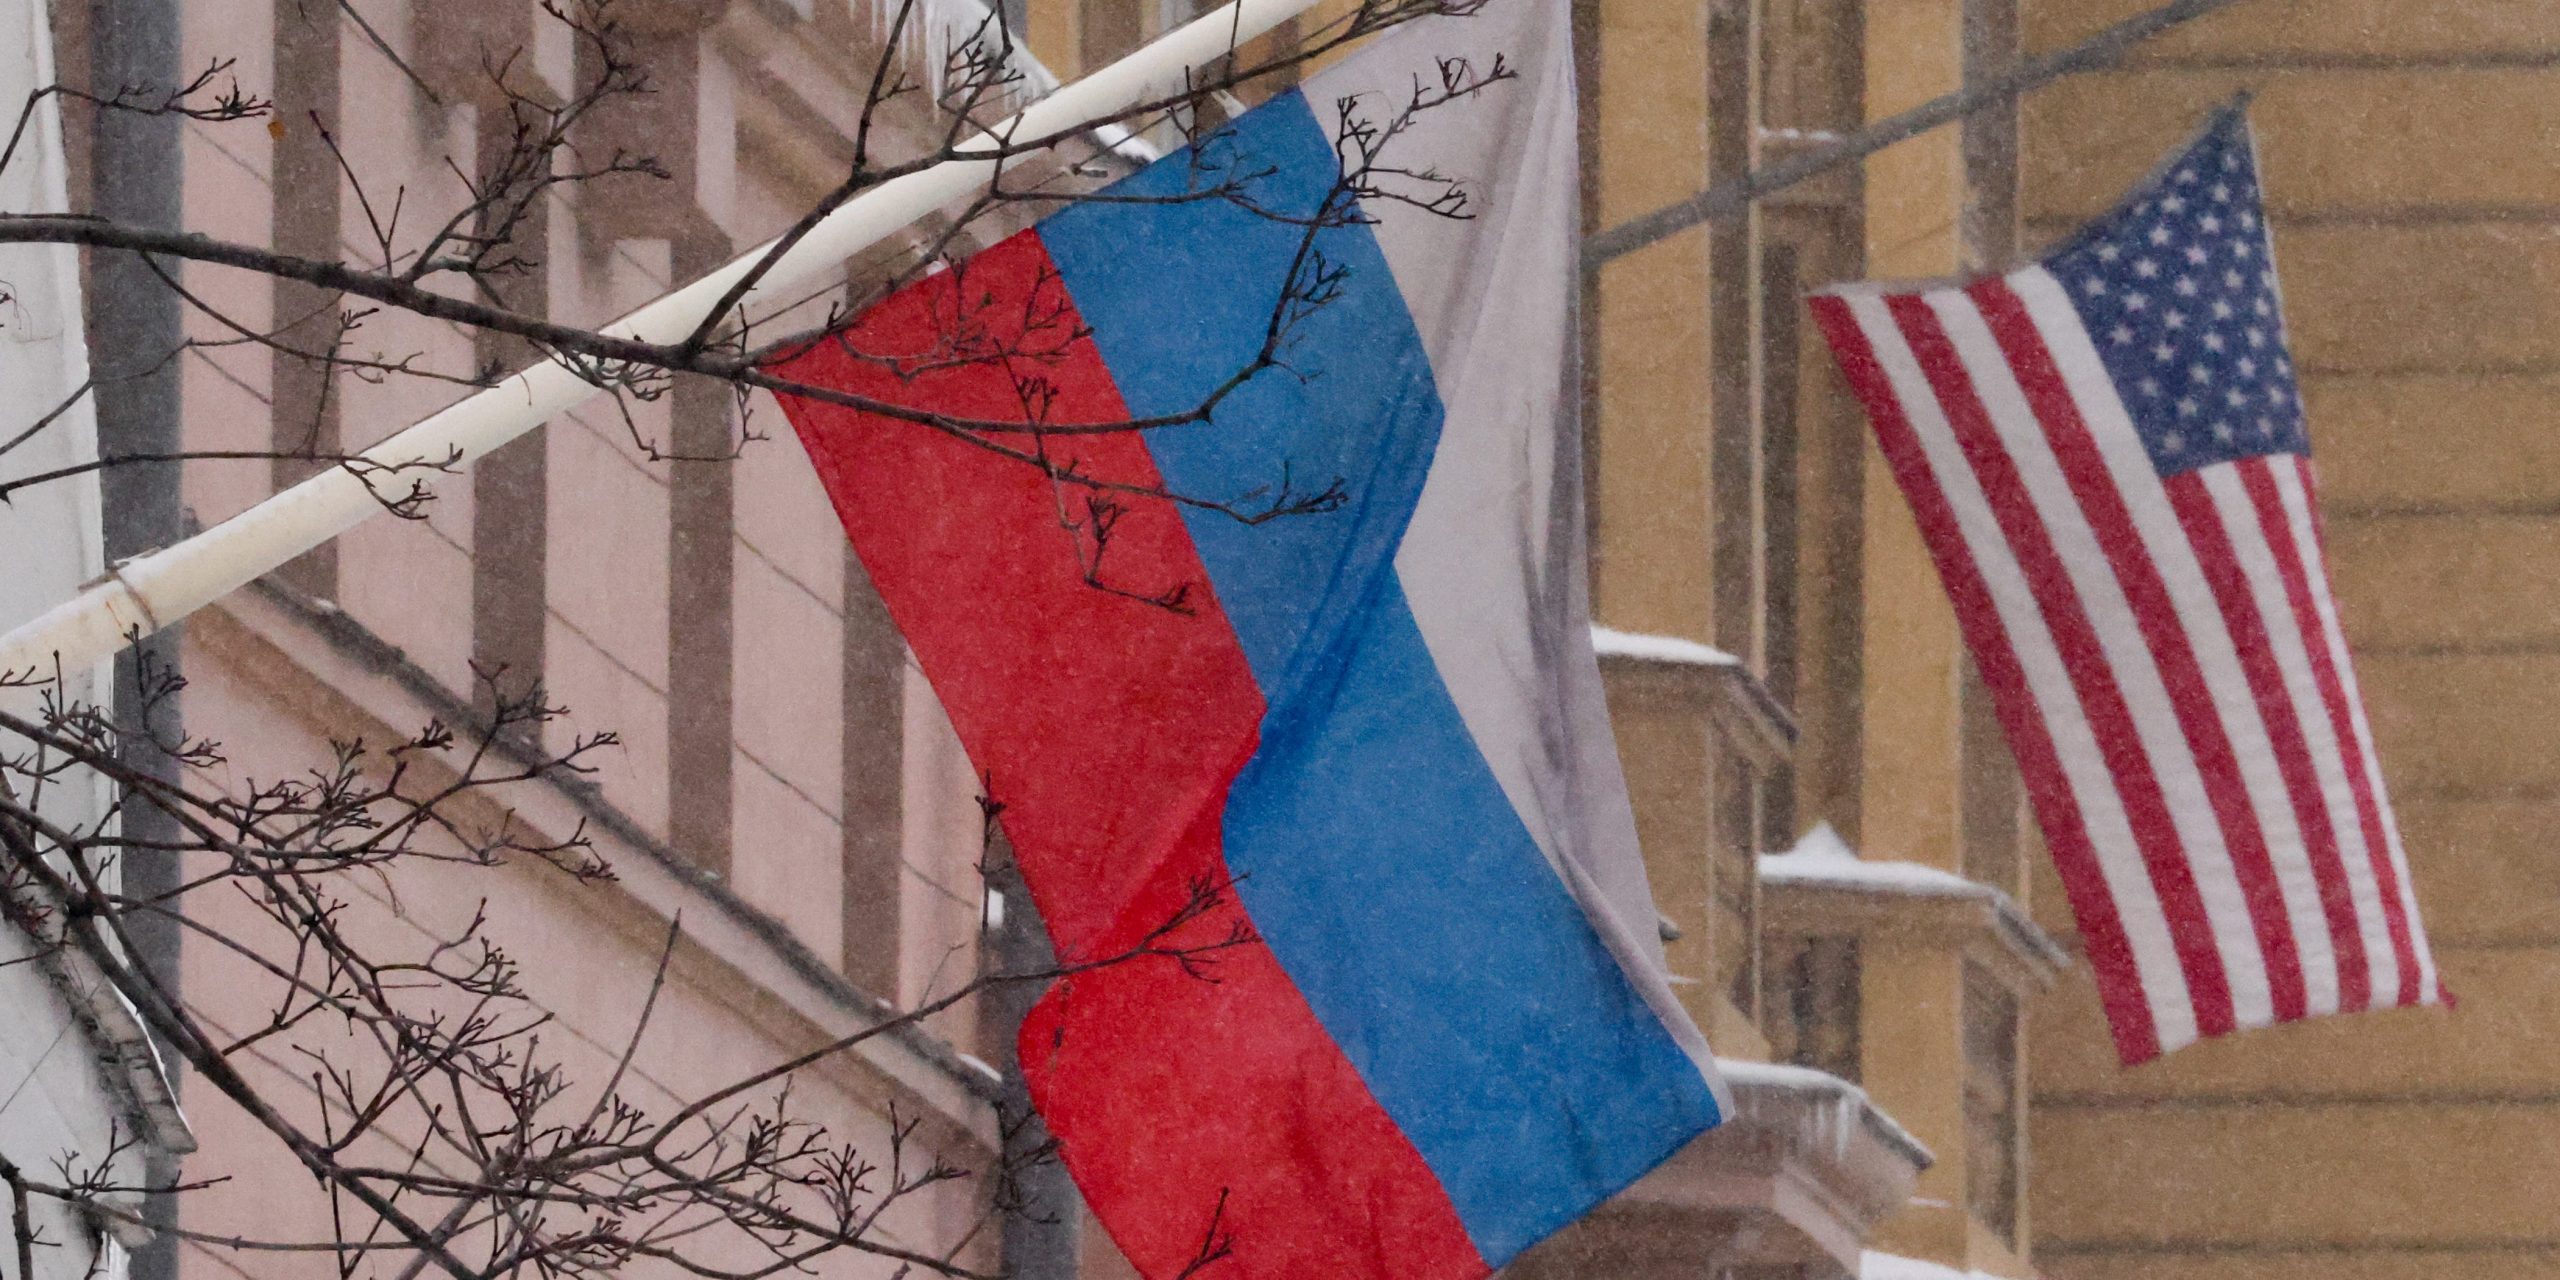 A Russian flag and American flag outside a building.